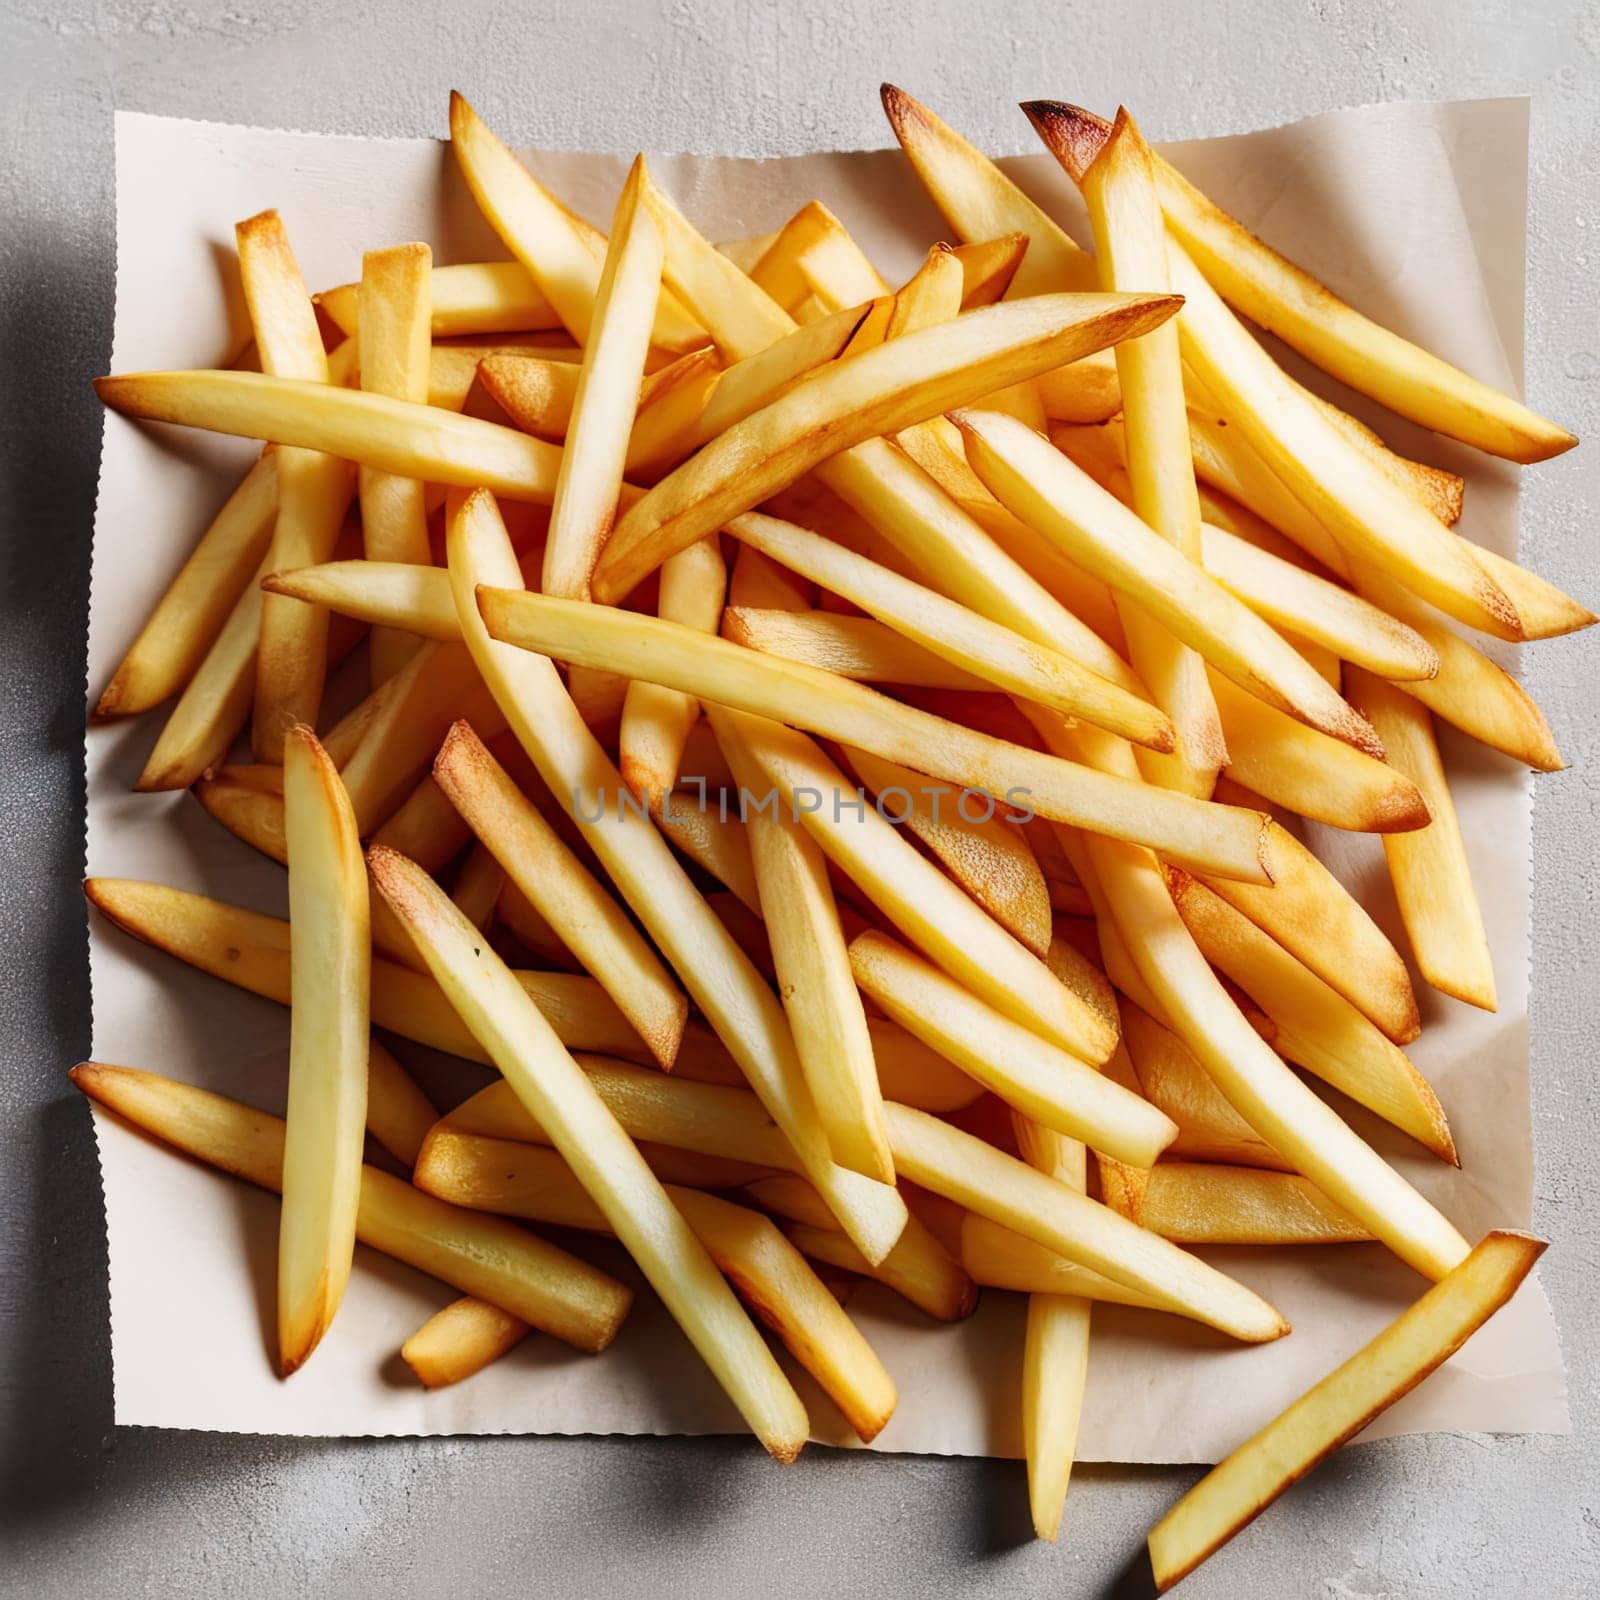 Top view of tasty unhealthy french fries on paper